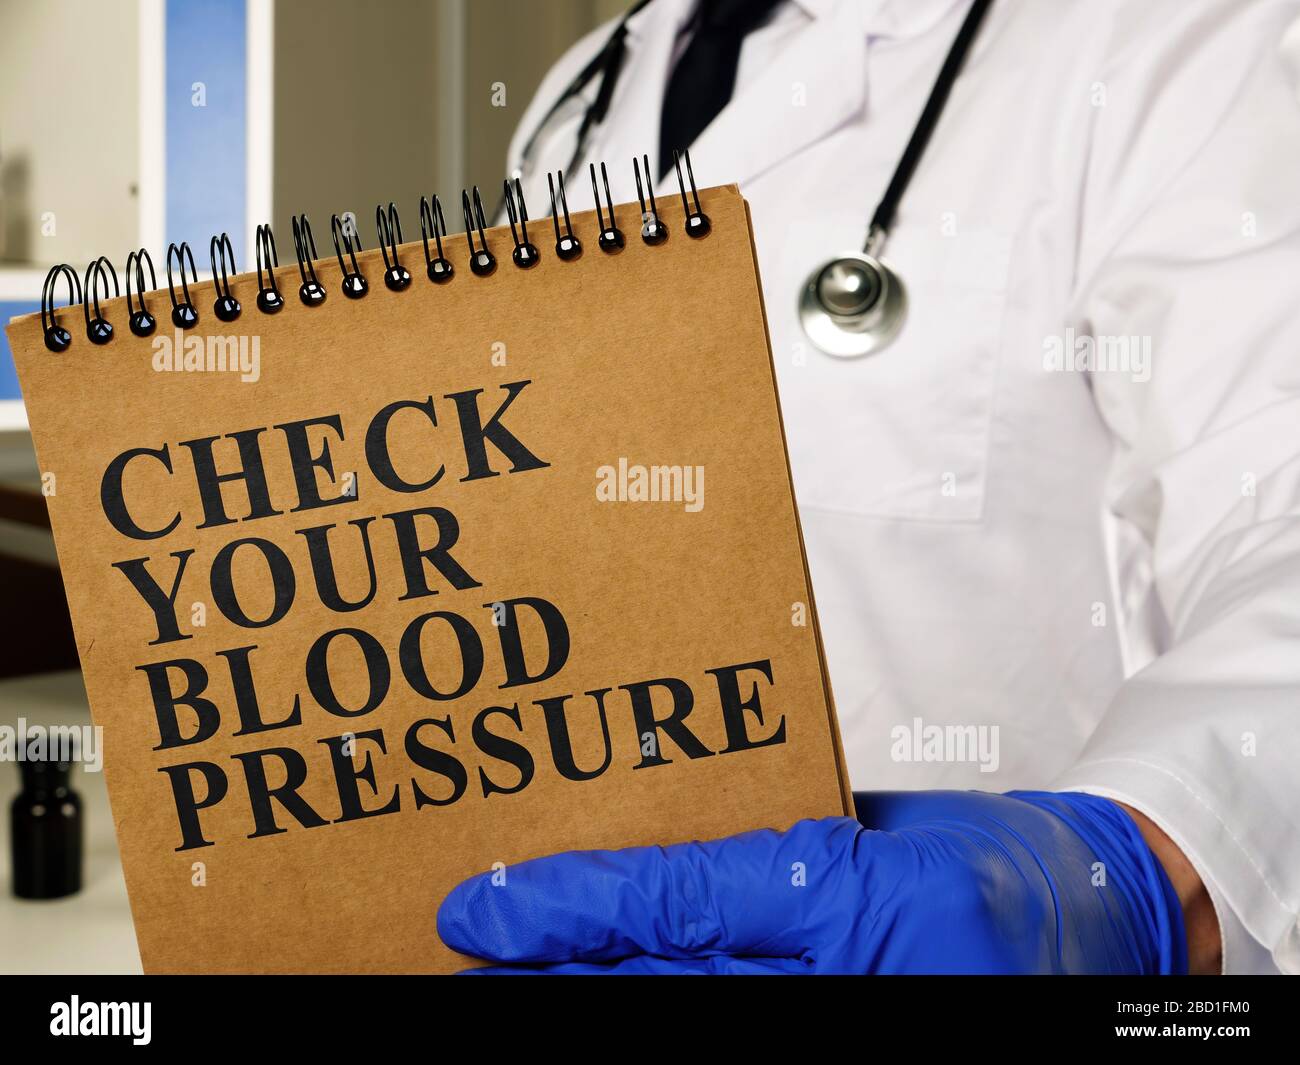 High Blood Pressure Hypertension concept. Man shows sign Check your blood pressure. Stock Photo